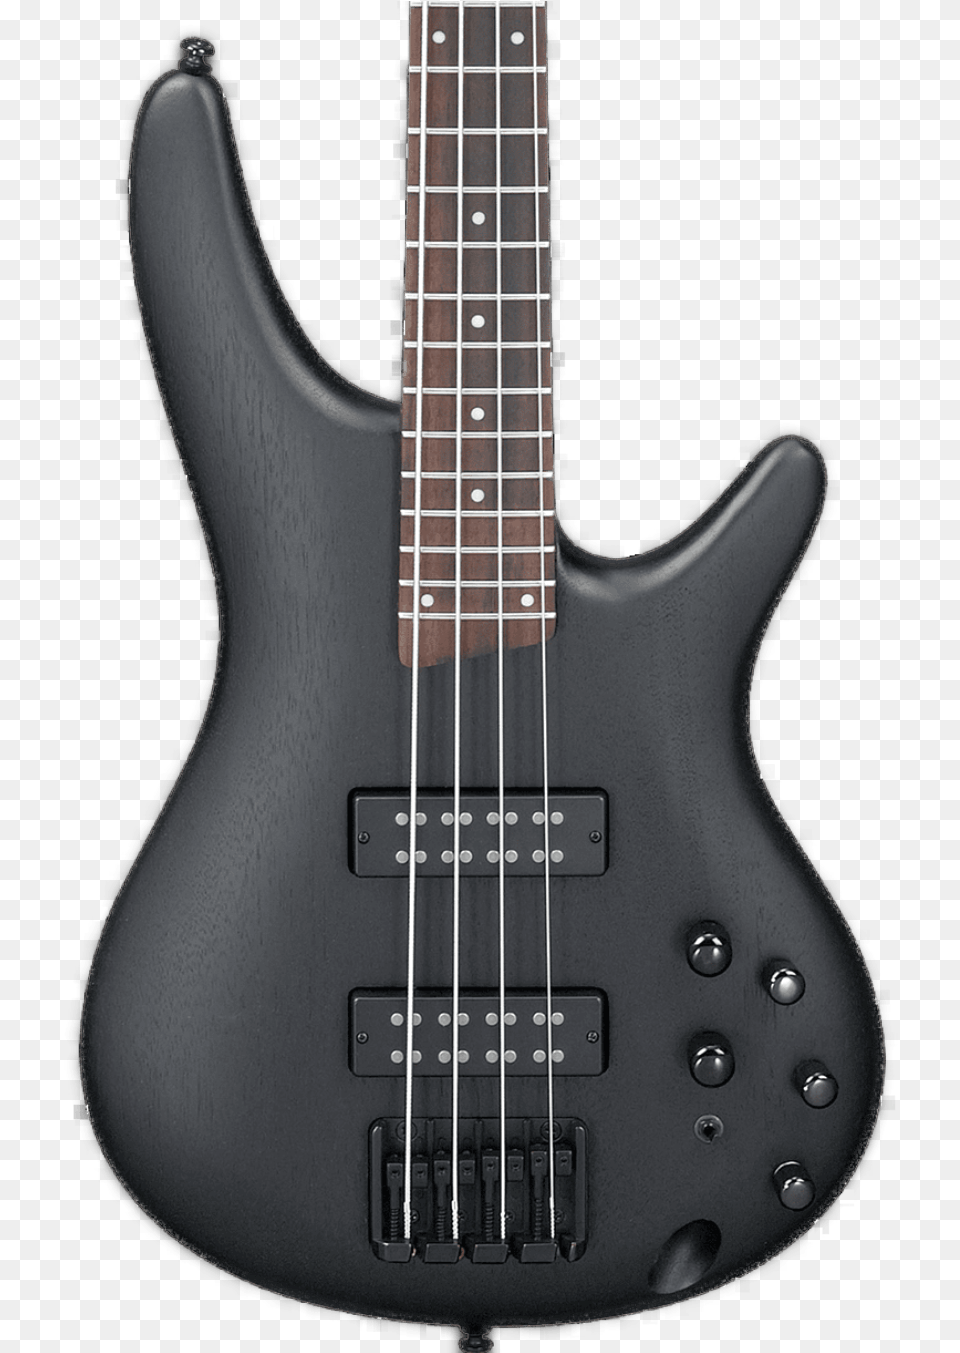 Ibanez Sr300 Series Basses Andertons Music Co 4 String Bass Guitar, Bass Guitar, Musical Instrument Png Image